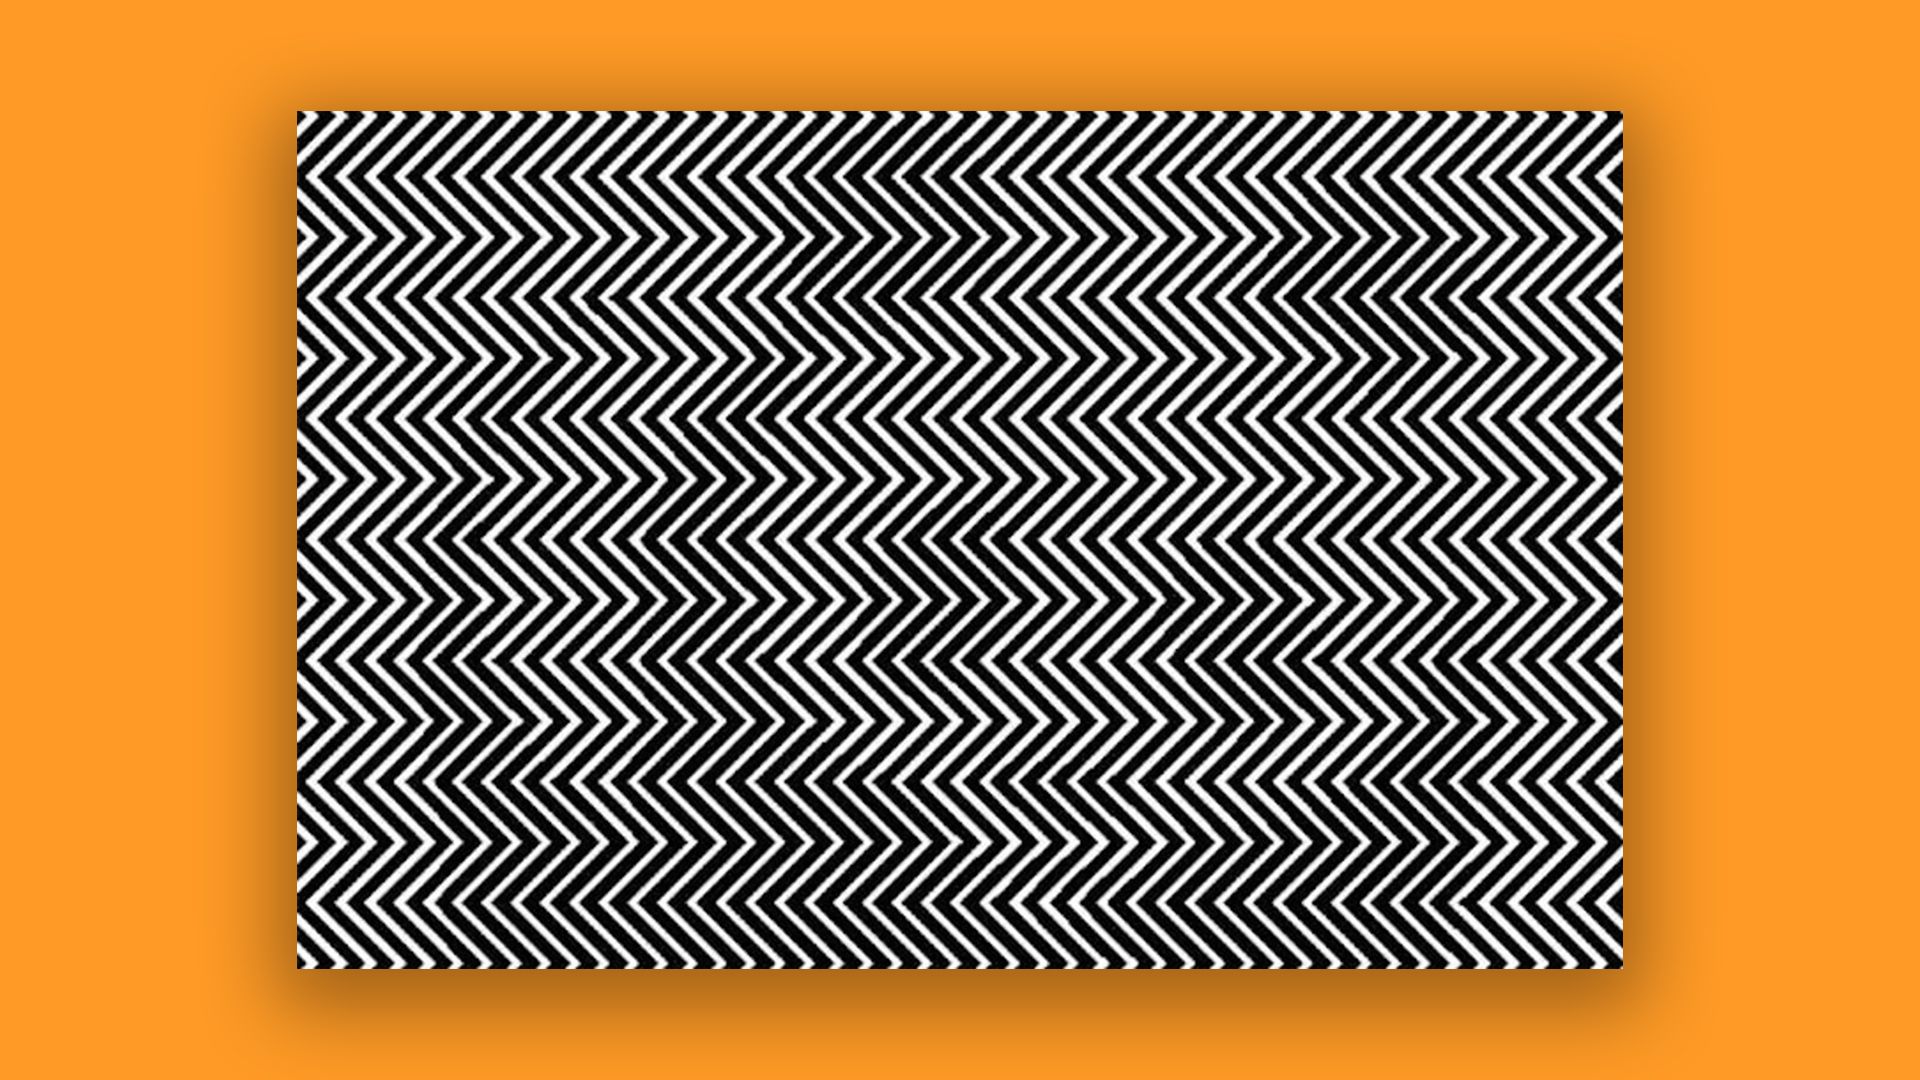 Mind-blowing Optical Illusions